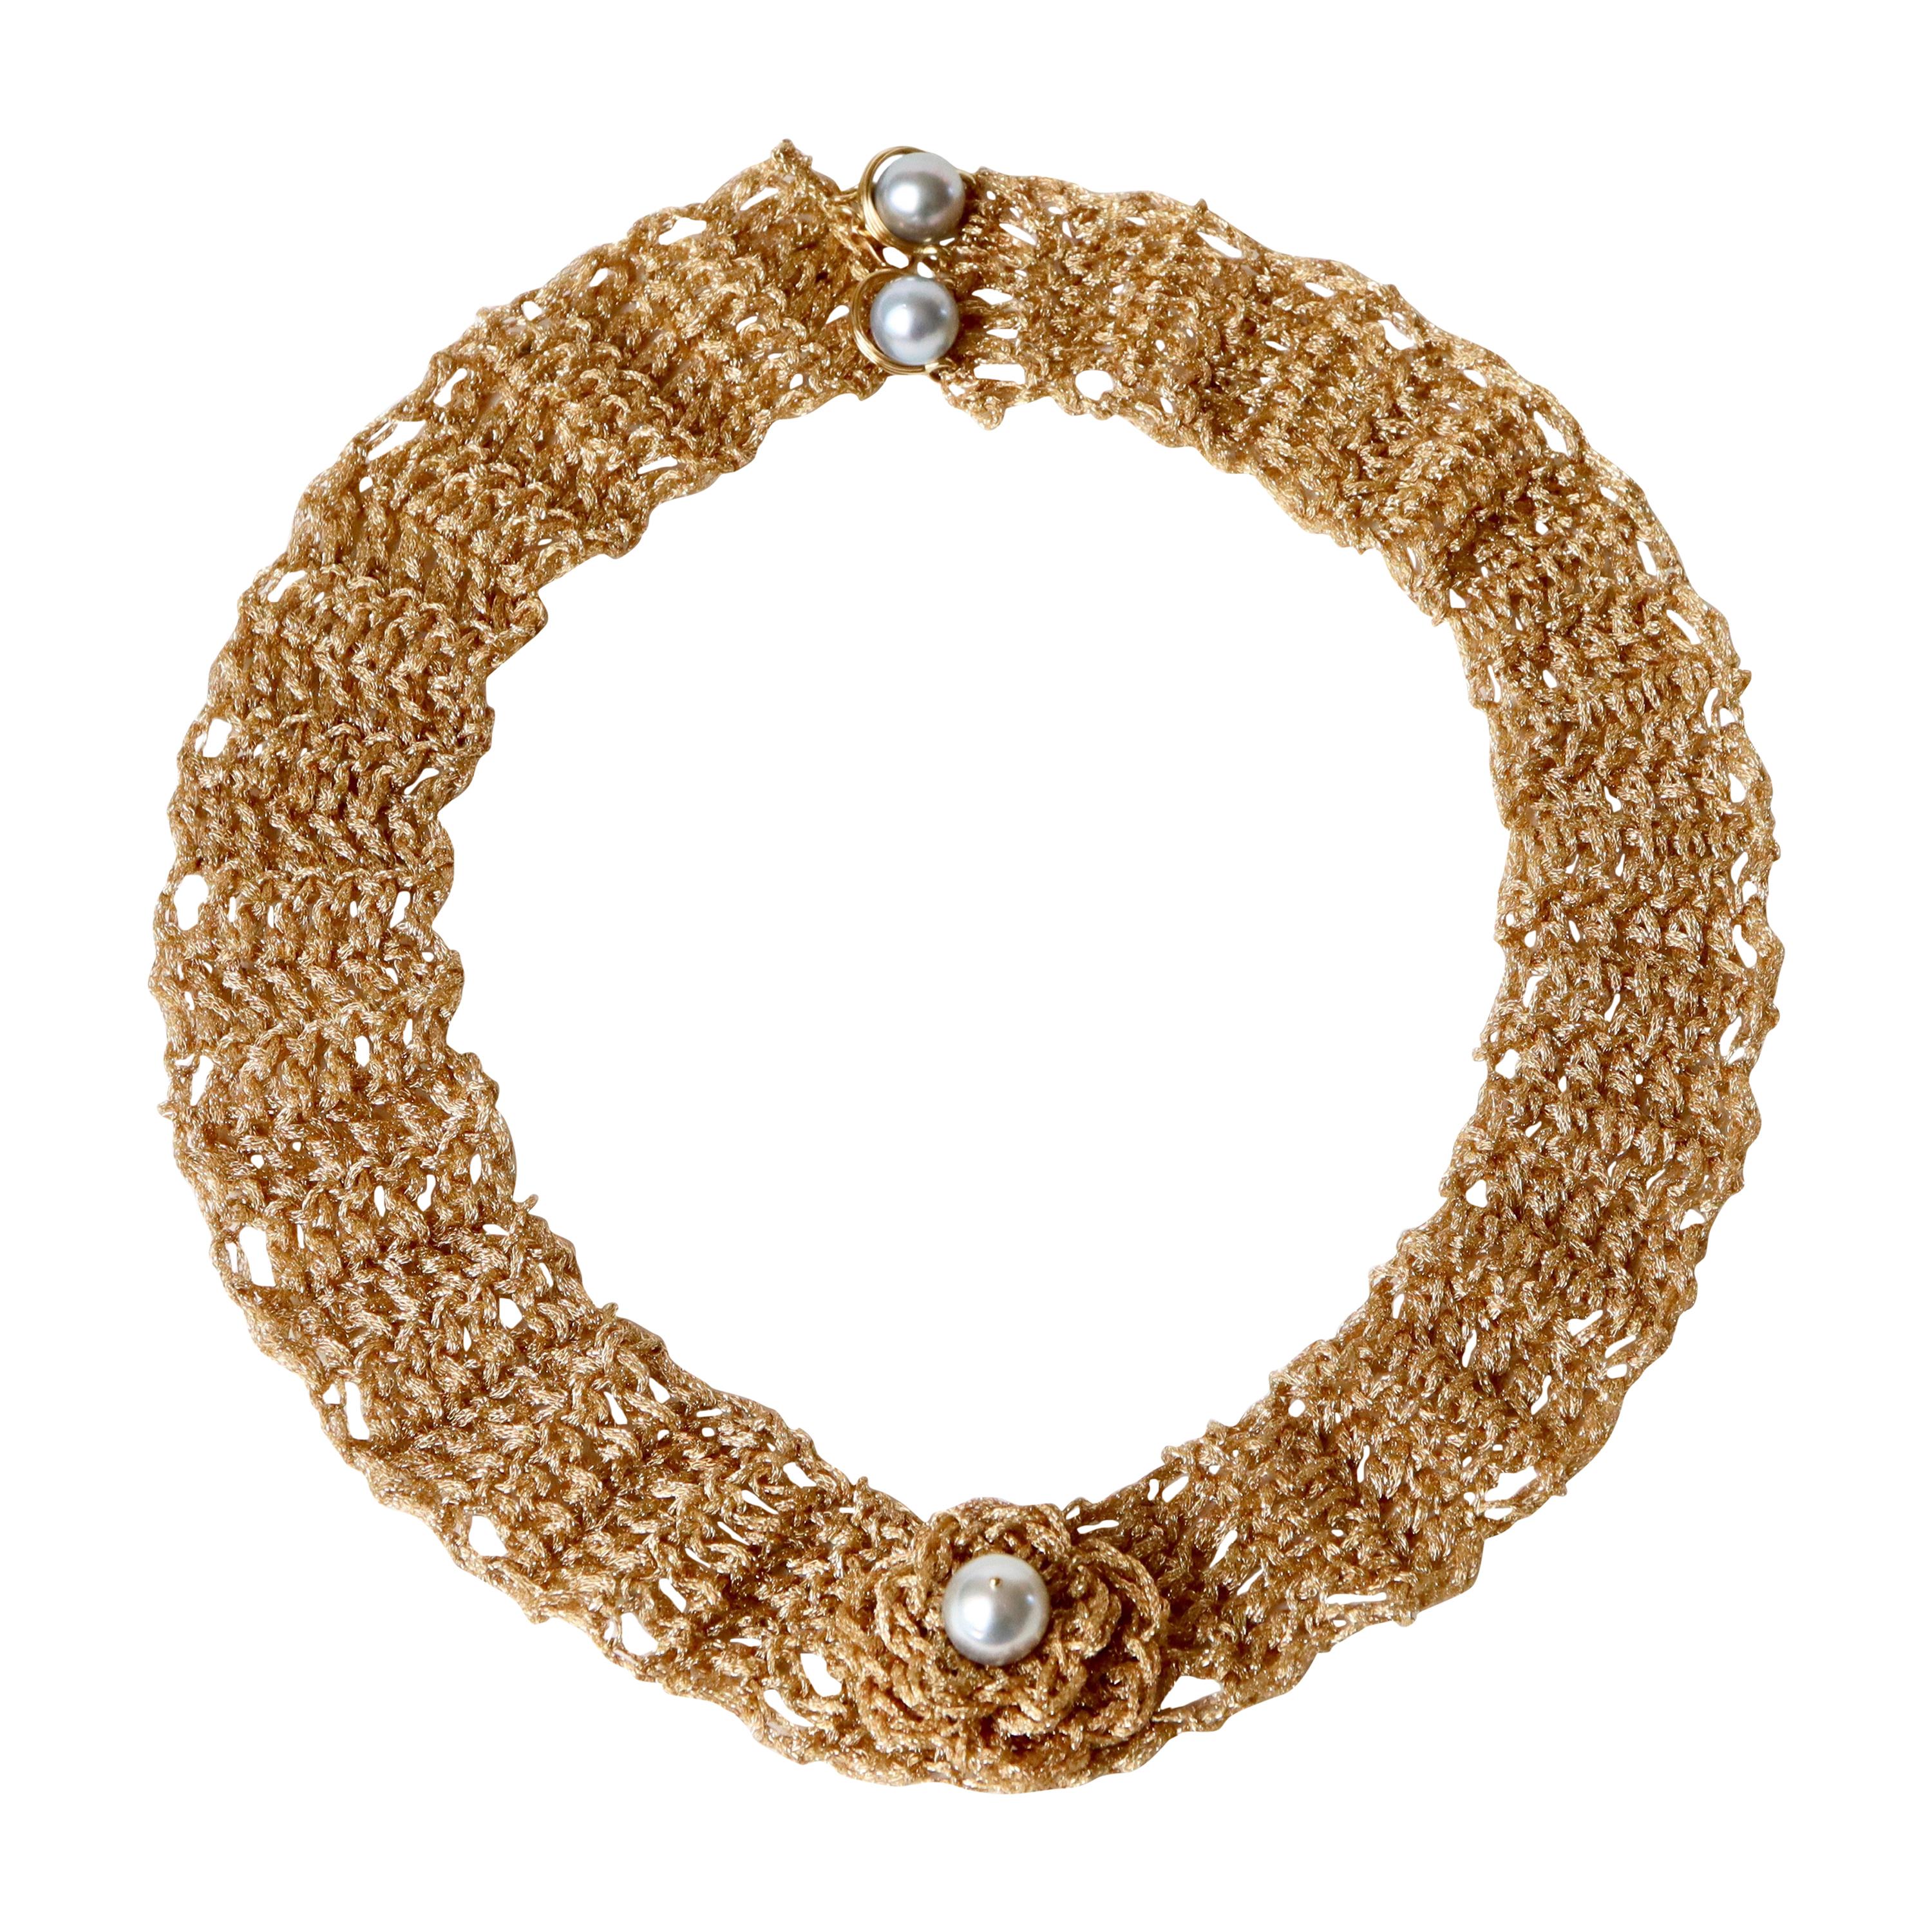 Important Necklace in 18 Karat Gold Knitted Gold Thread adorned with Pearls